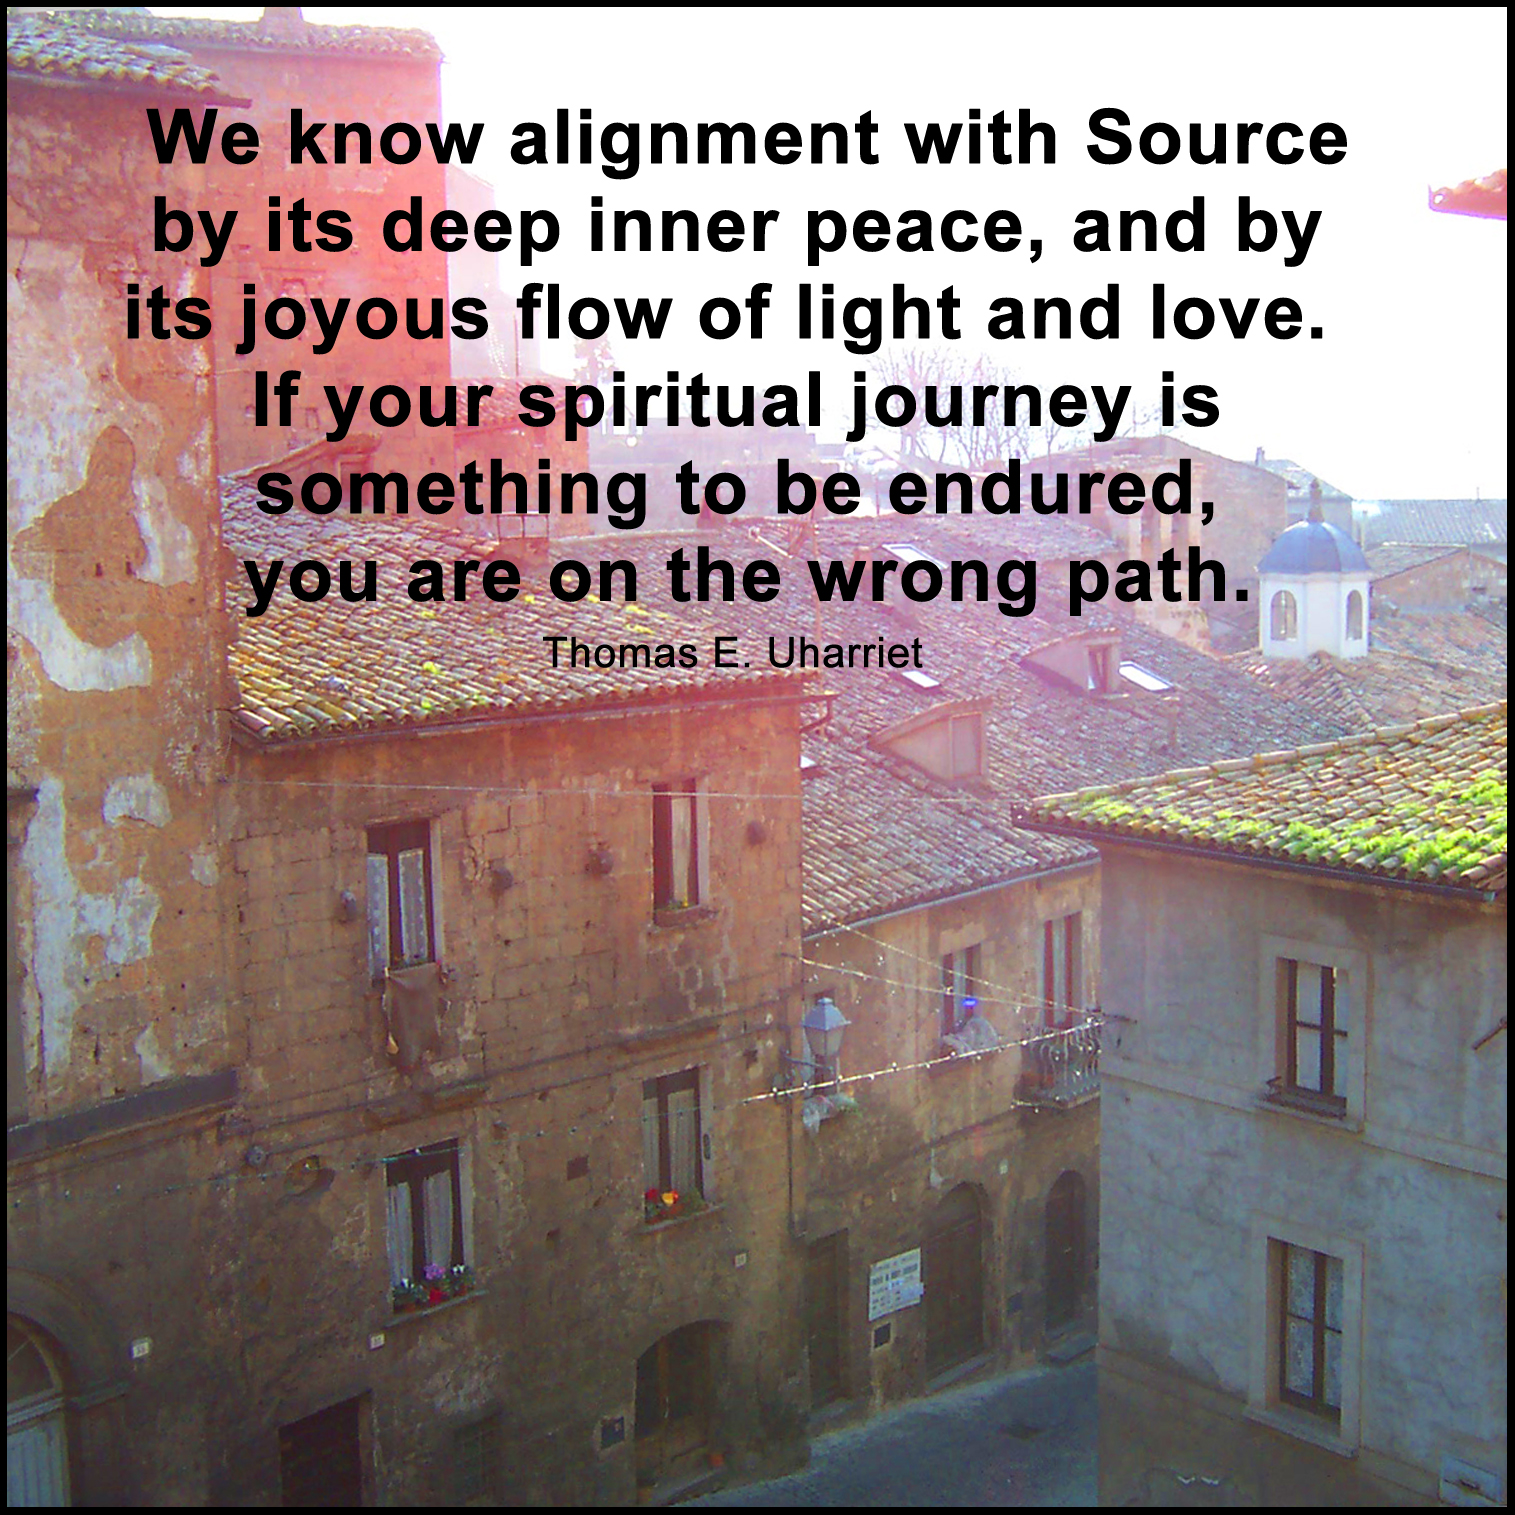 "We know alignment with Source by its deep inner peace, and by its joyous flow of light and love" (Rev. Thomas E. Uharriet).